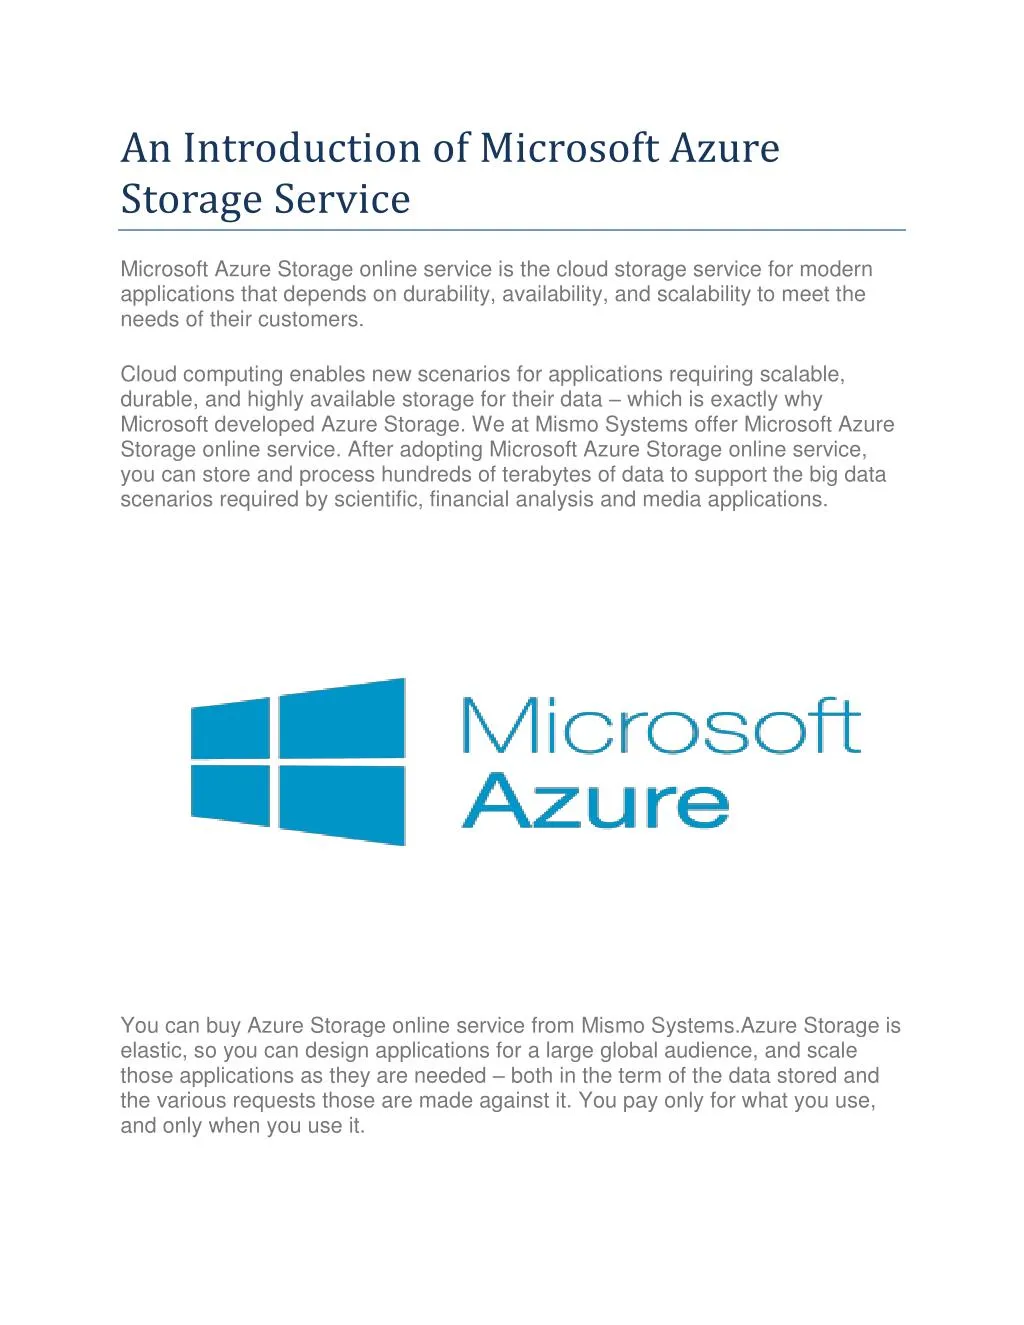 an introduction of microsoft azure storage service